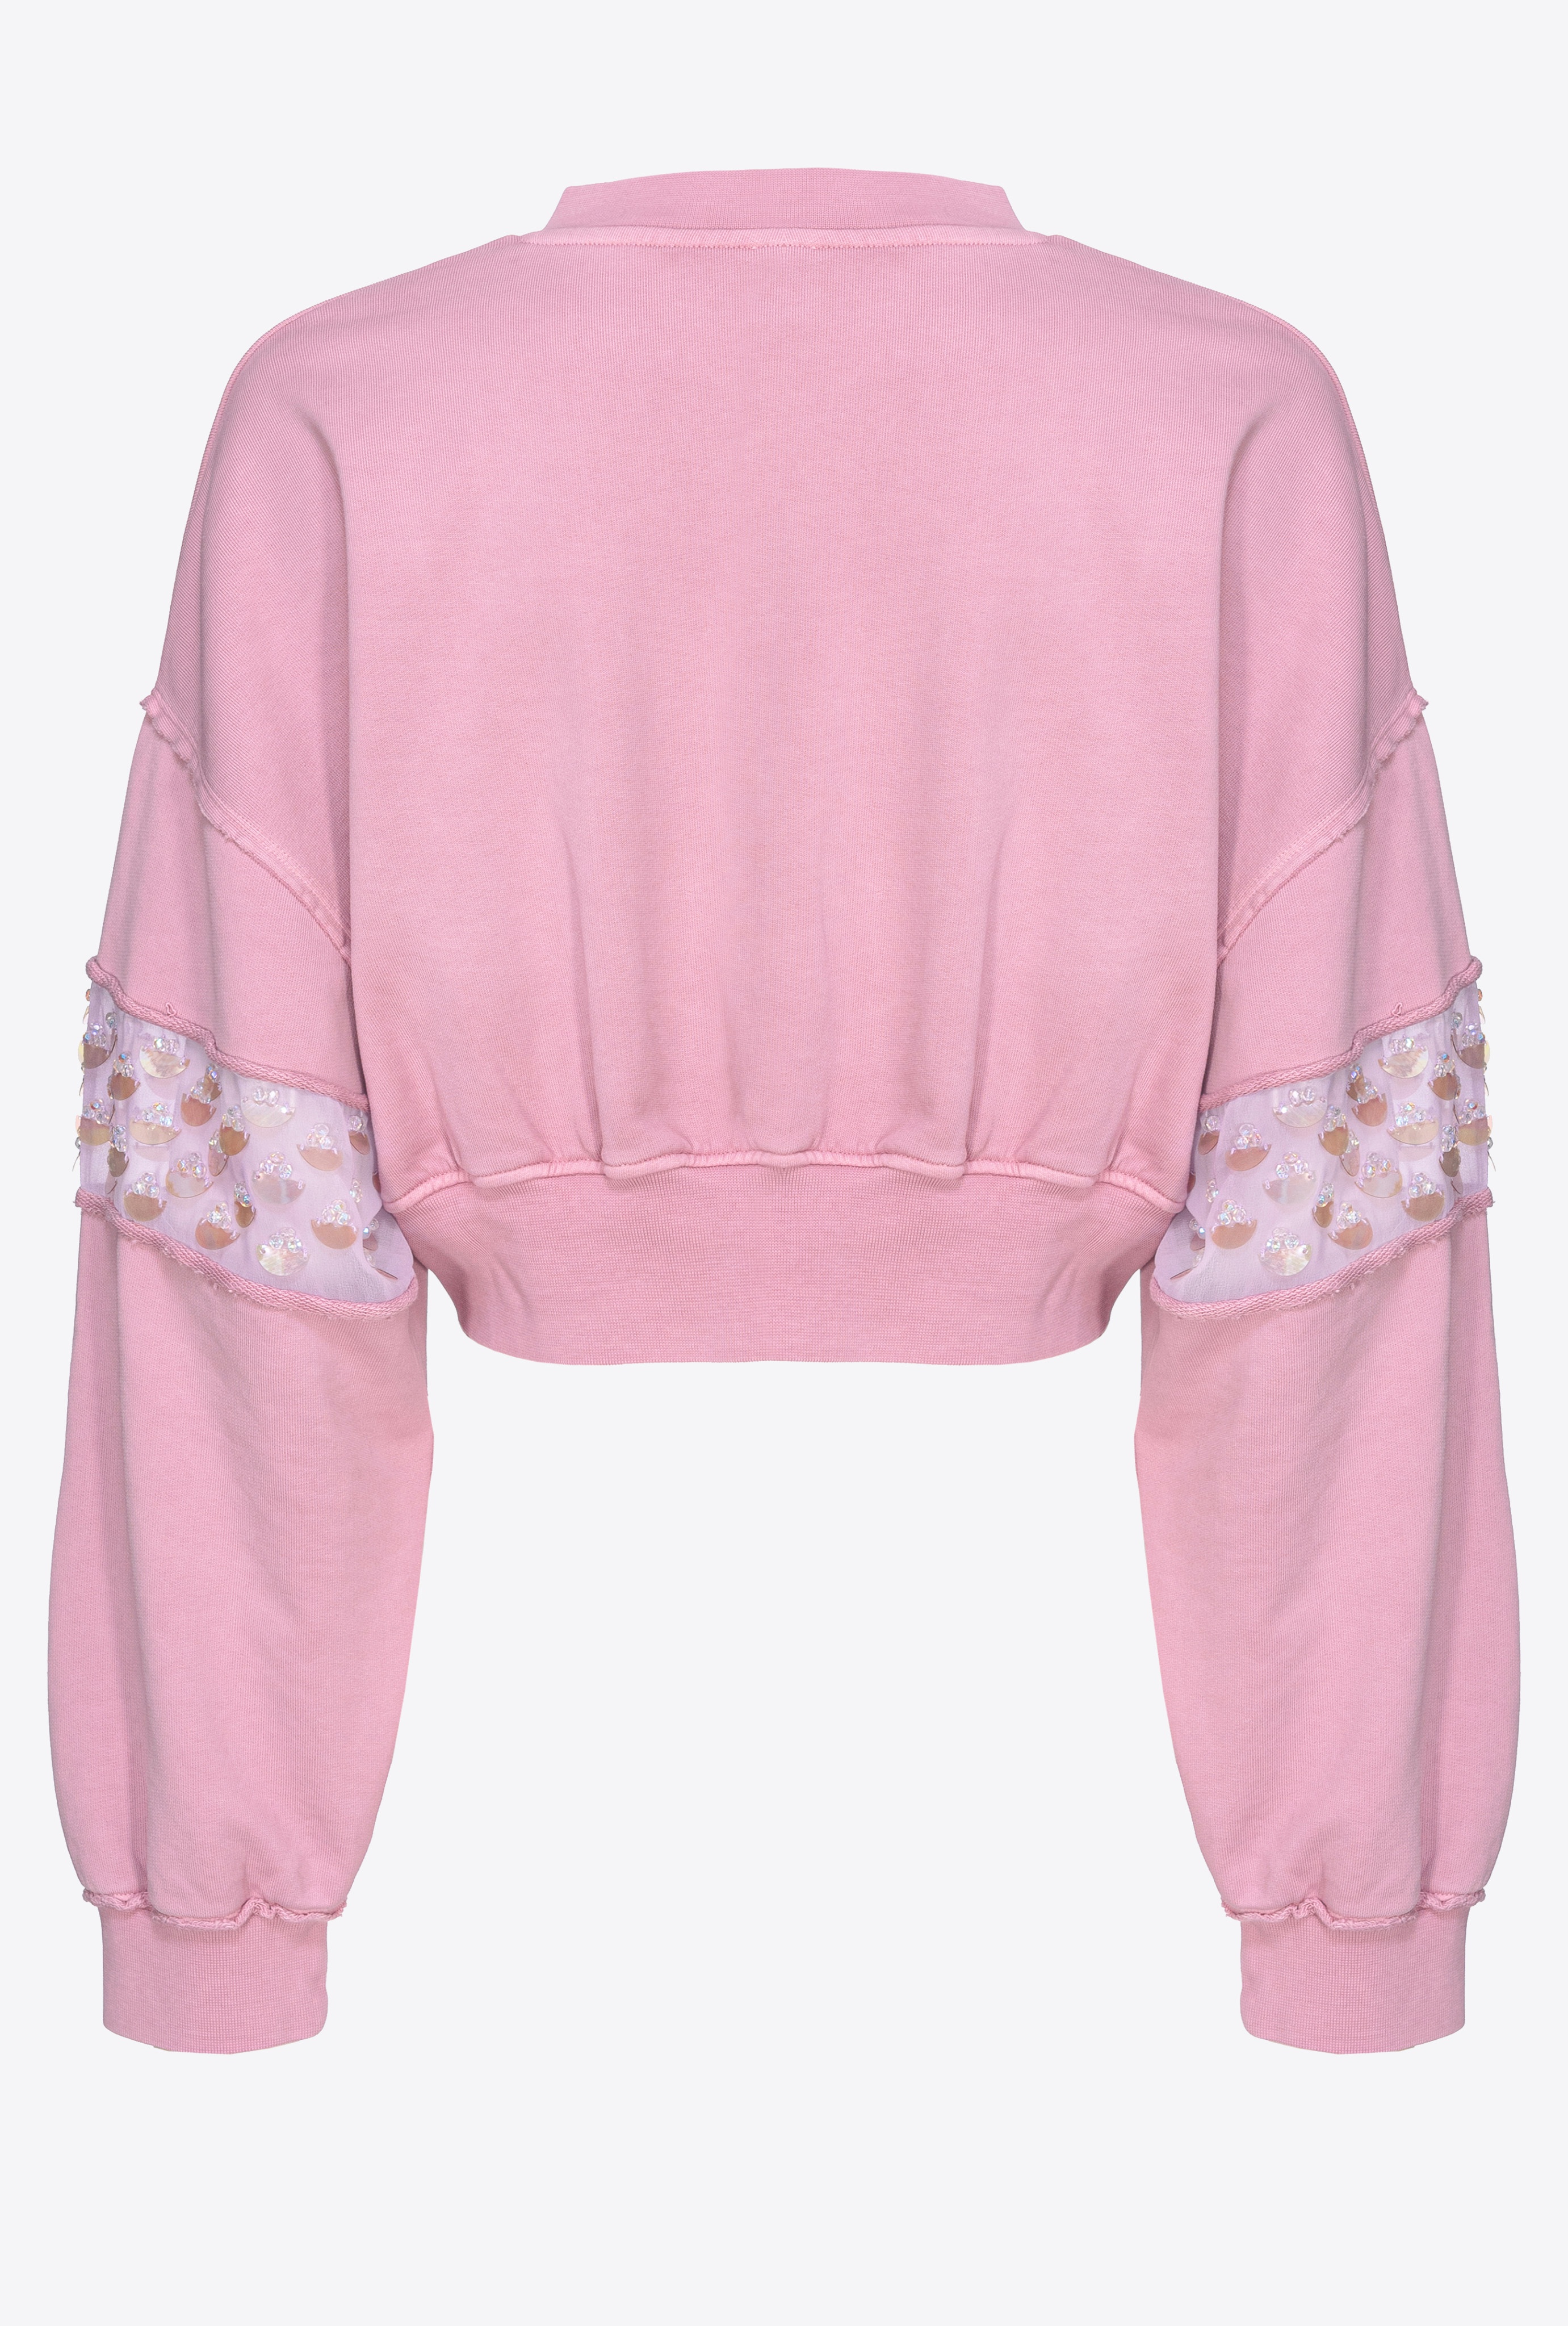 SHORT SWEATSHIRT WITH HAND-EMBROIDERED DETAIL - 5